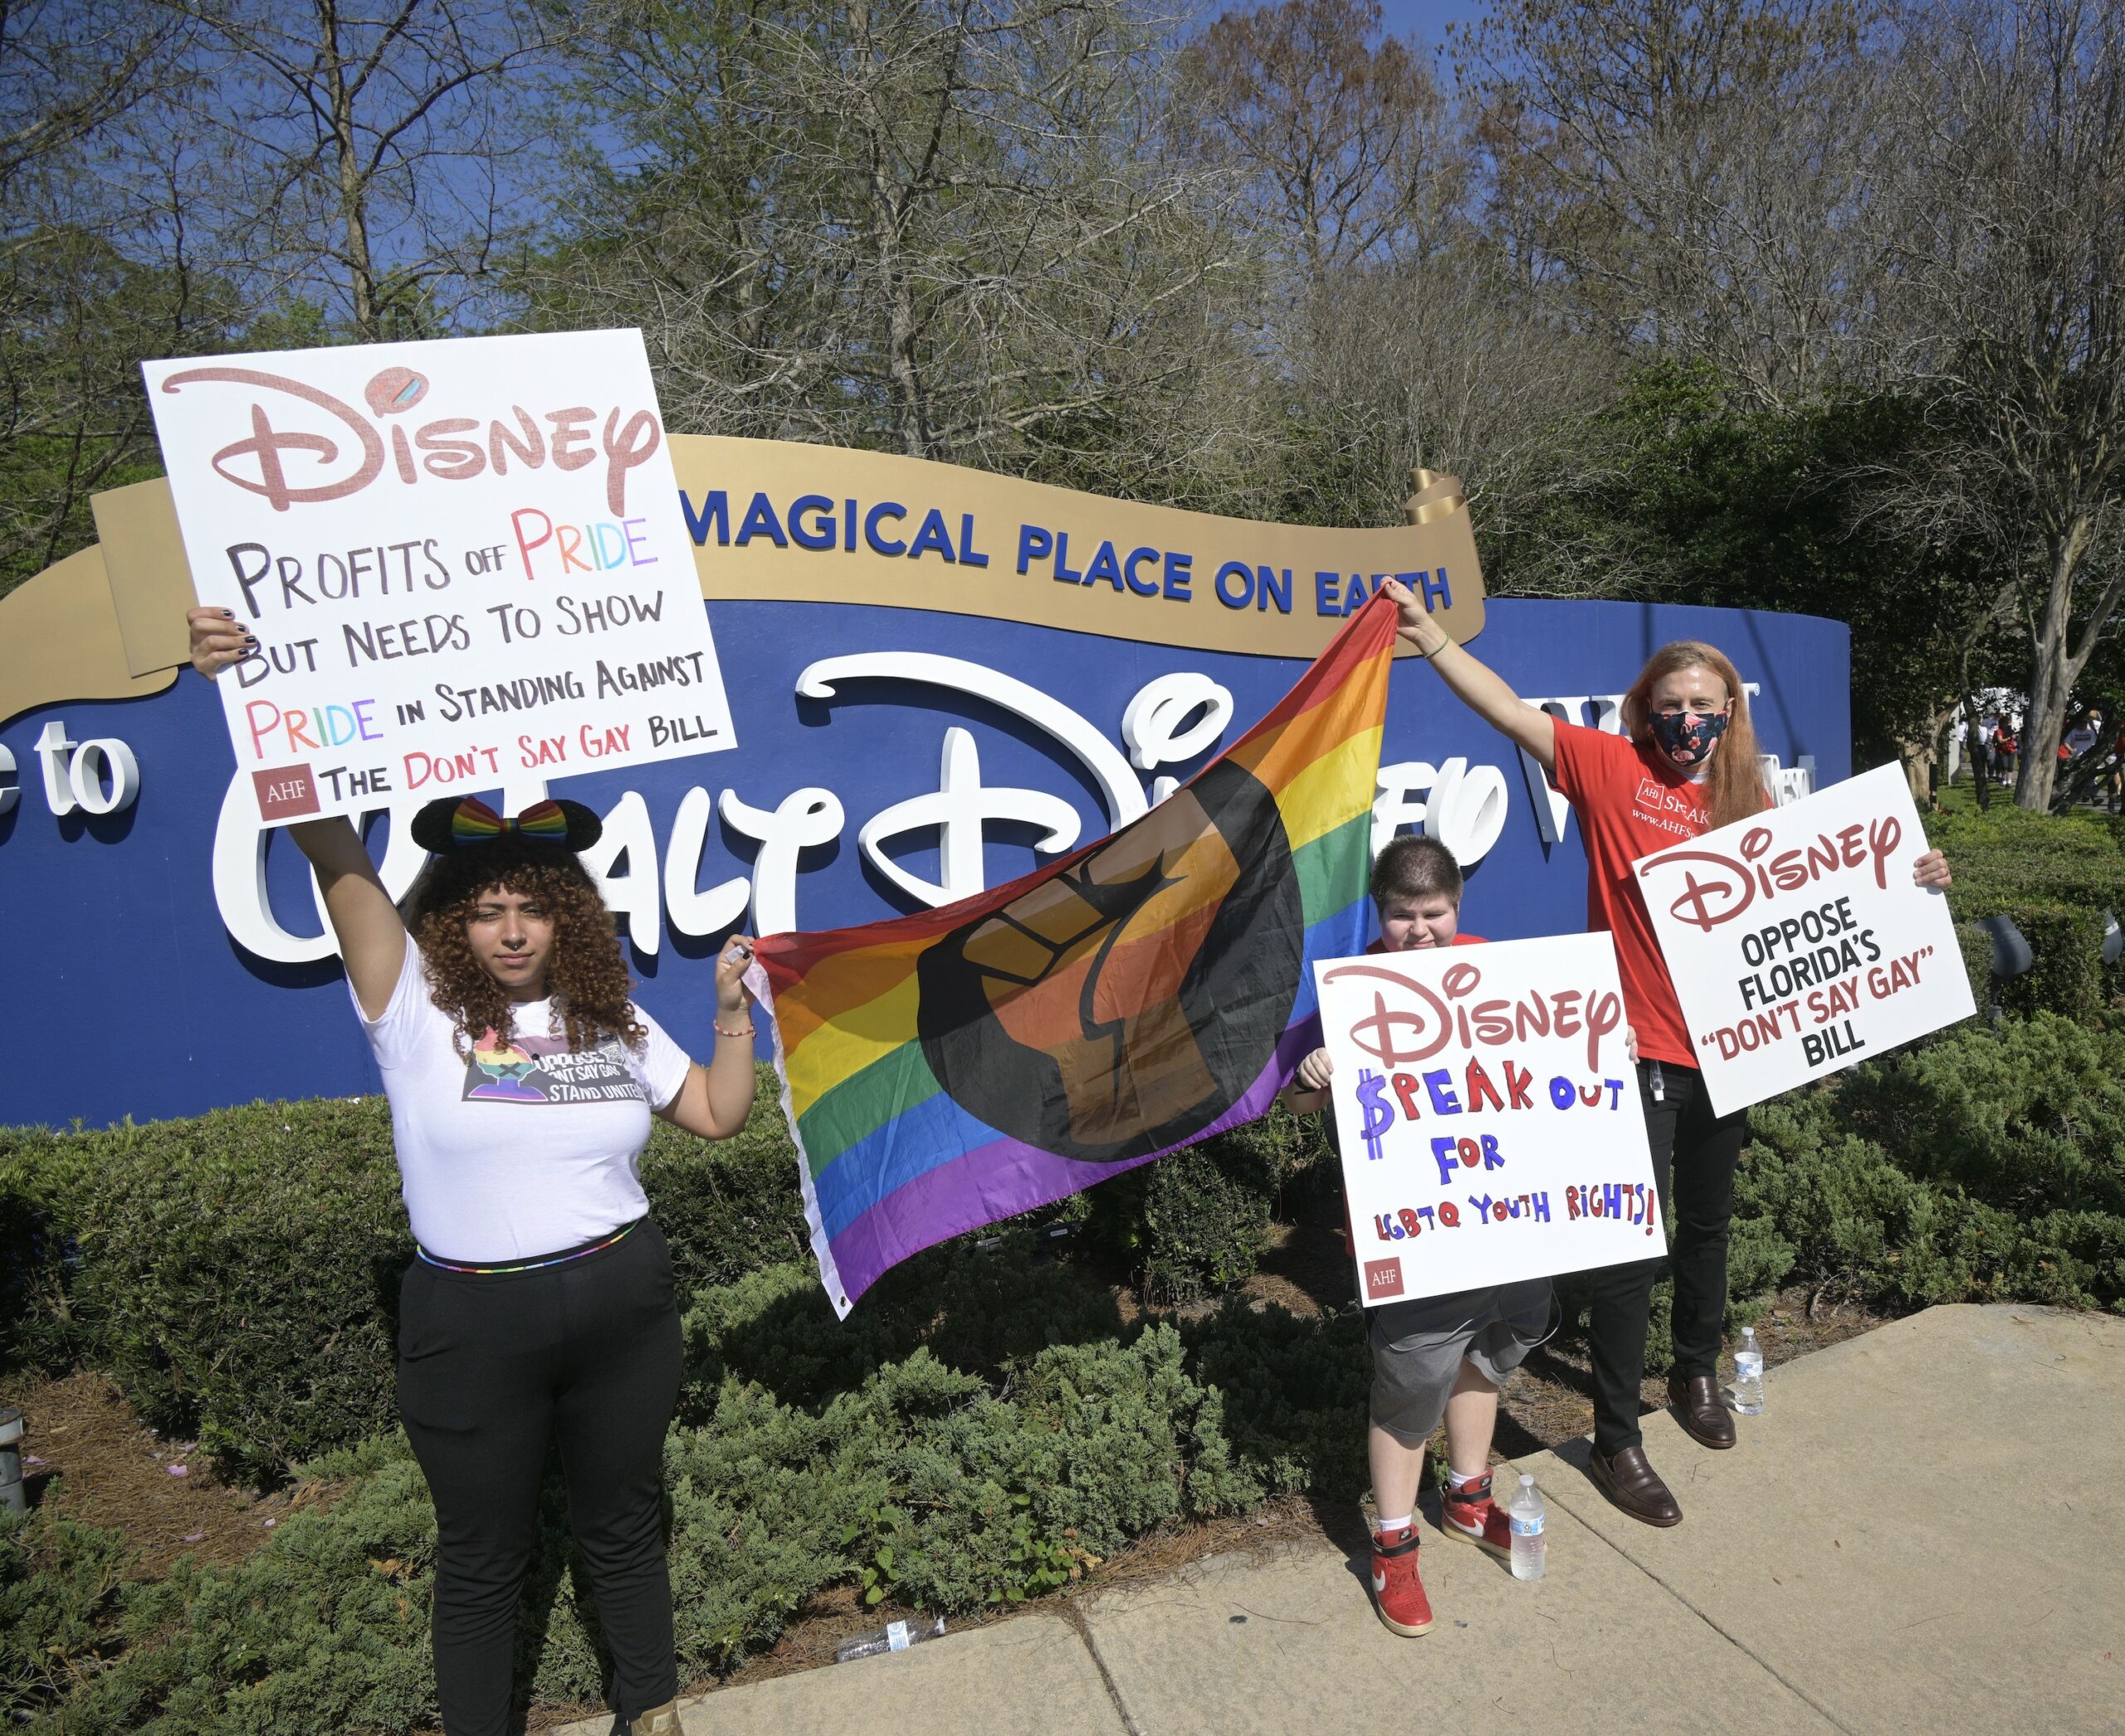 hree people stand in front of the “Welcome to Walt Disney World” theme park holding protest signs. Two of the people hold opposite ends of an LGBTQ pride flag with a brown fist in the center. Their signs read, “DISNEY PROFITS OFF PRIDE BUT NEEDS TO SHOW PRIDE IN STANDING AGAINST THE DON’T SAY GAY BILL;” “DISNEY SPEAK OUT FOR LGBTQ YOUTH RIGHTS;” and “DISNEY OPPOSE FLORIDA’S ‘DON’T SAY GAY’ BILL.”